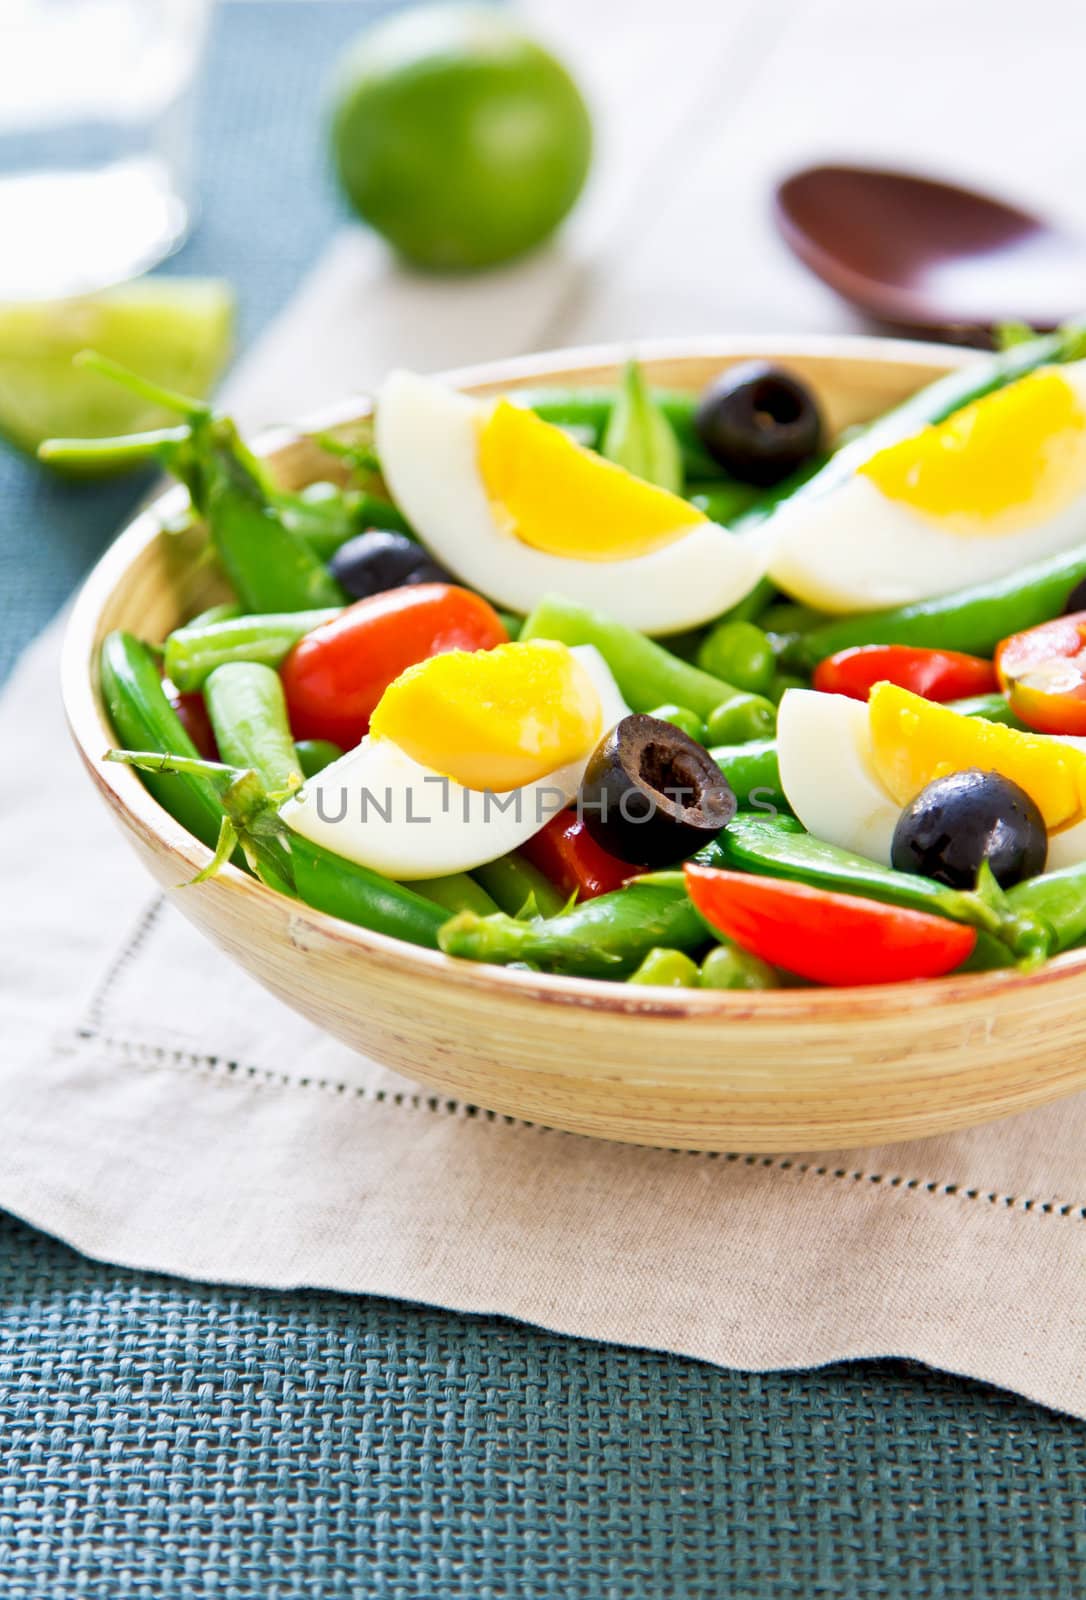 Green bean with Snap pea and egg salad by vanillaechoes